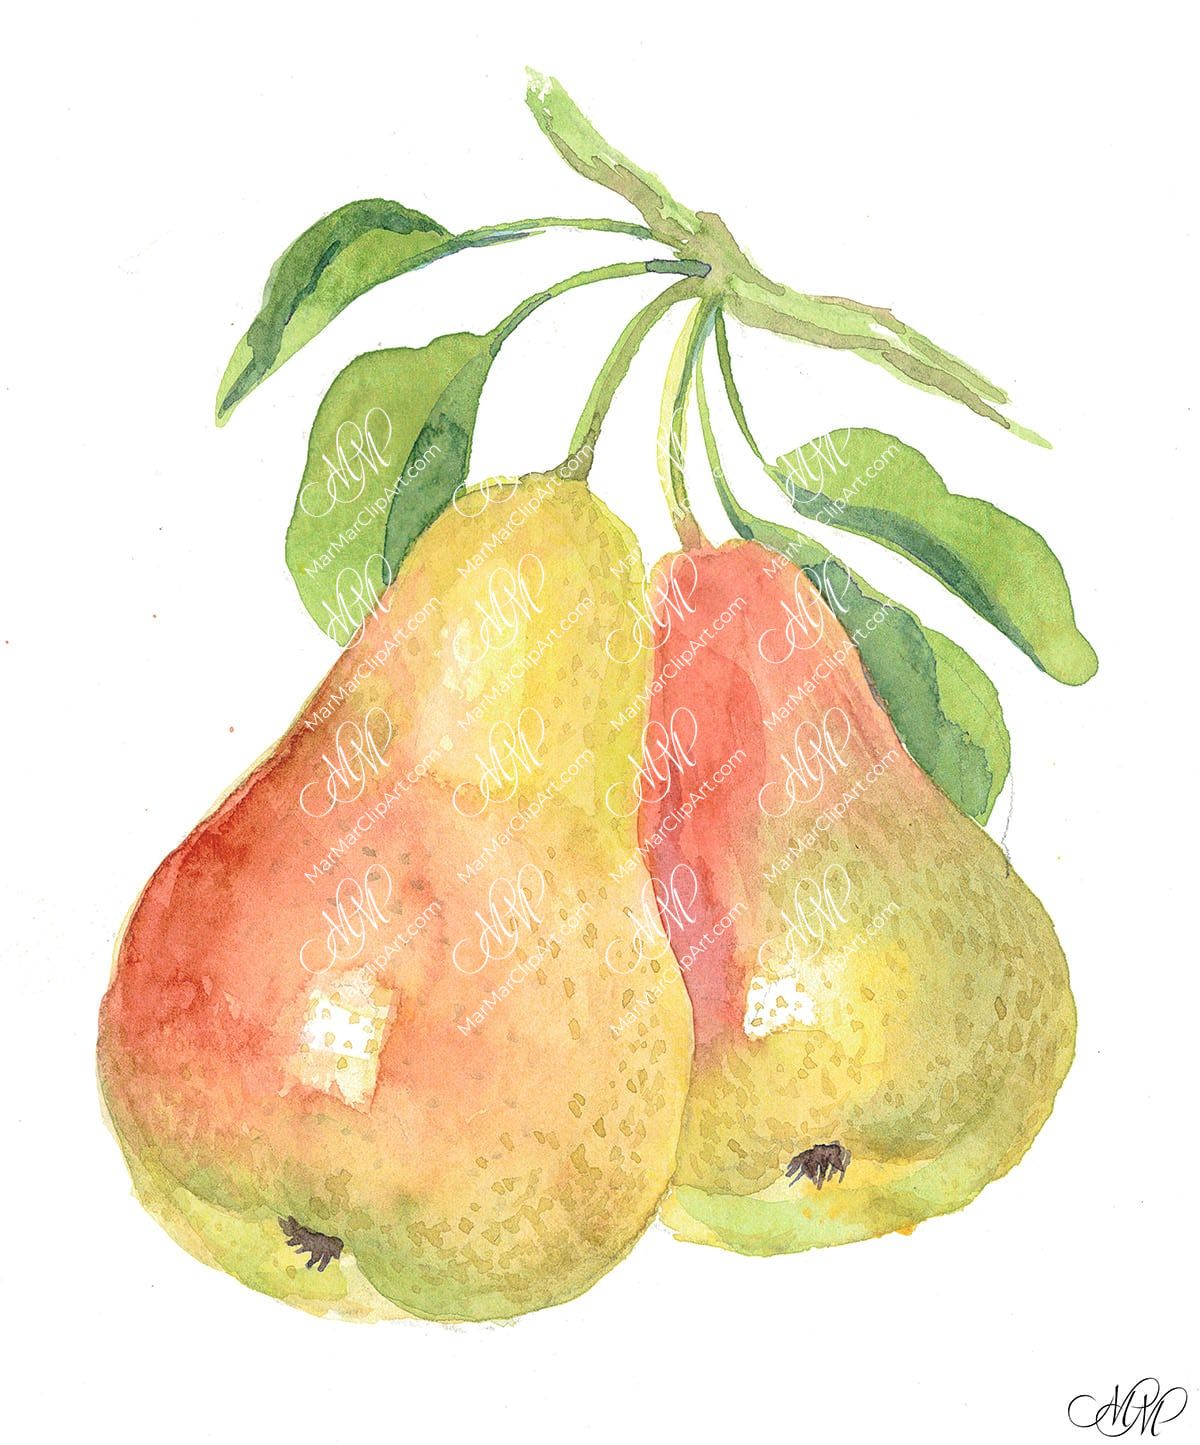 2 pears. Isolated on white background. Watercolor. 31x38 cm. Pera1.jpg 7Mb. RGB. 300 px. Instant download.